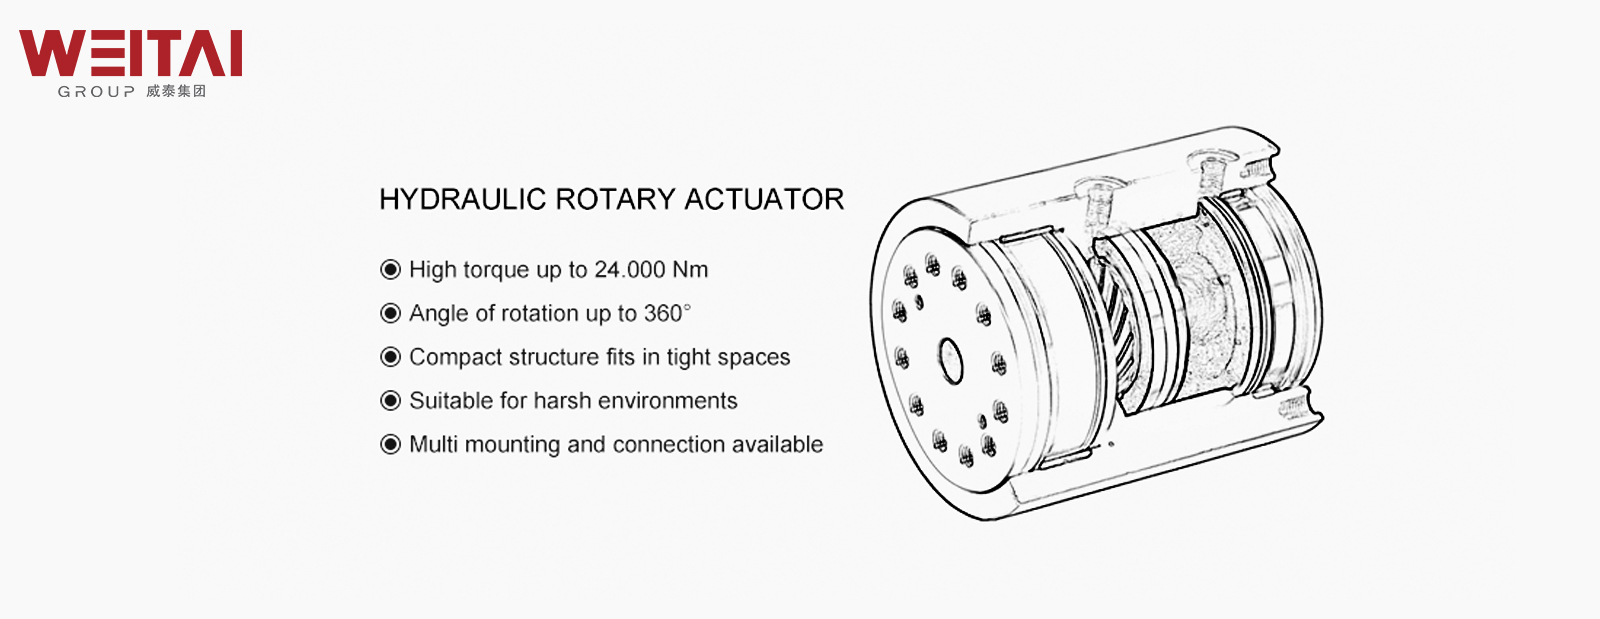 How to Choose the Most Suitable Rotary Cylinder for Excavator?